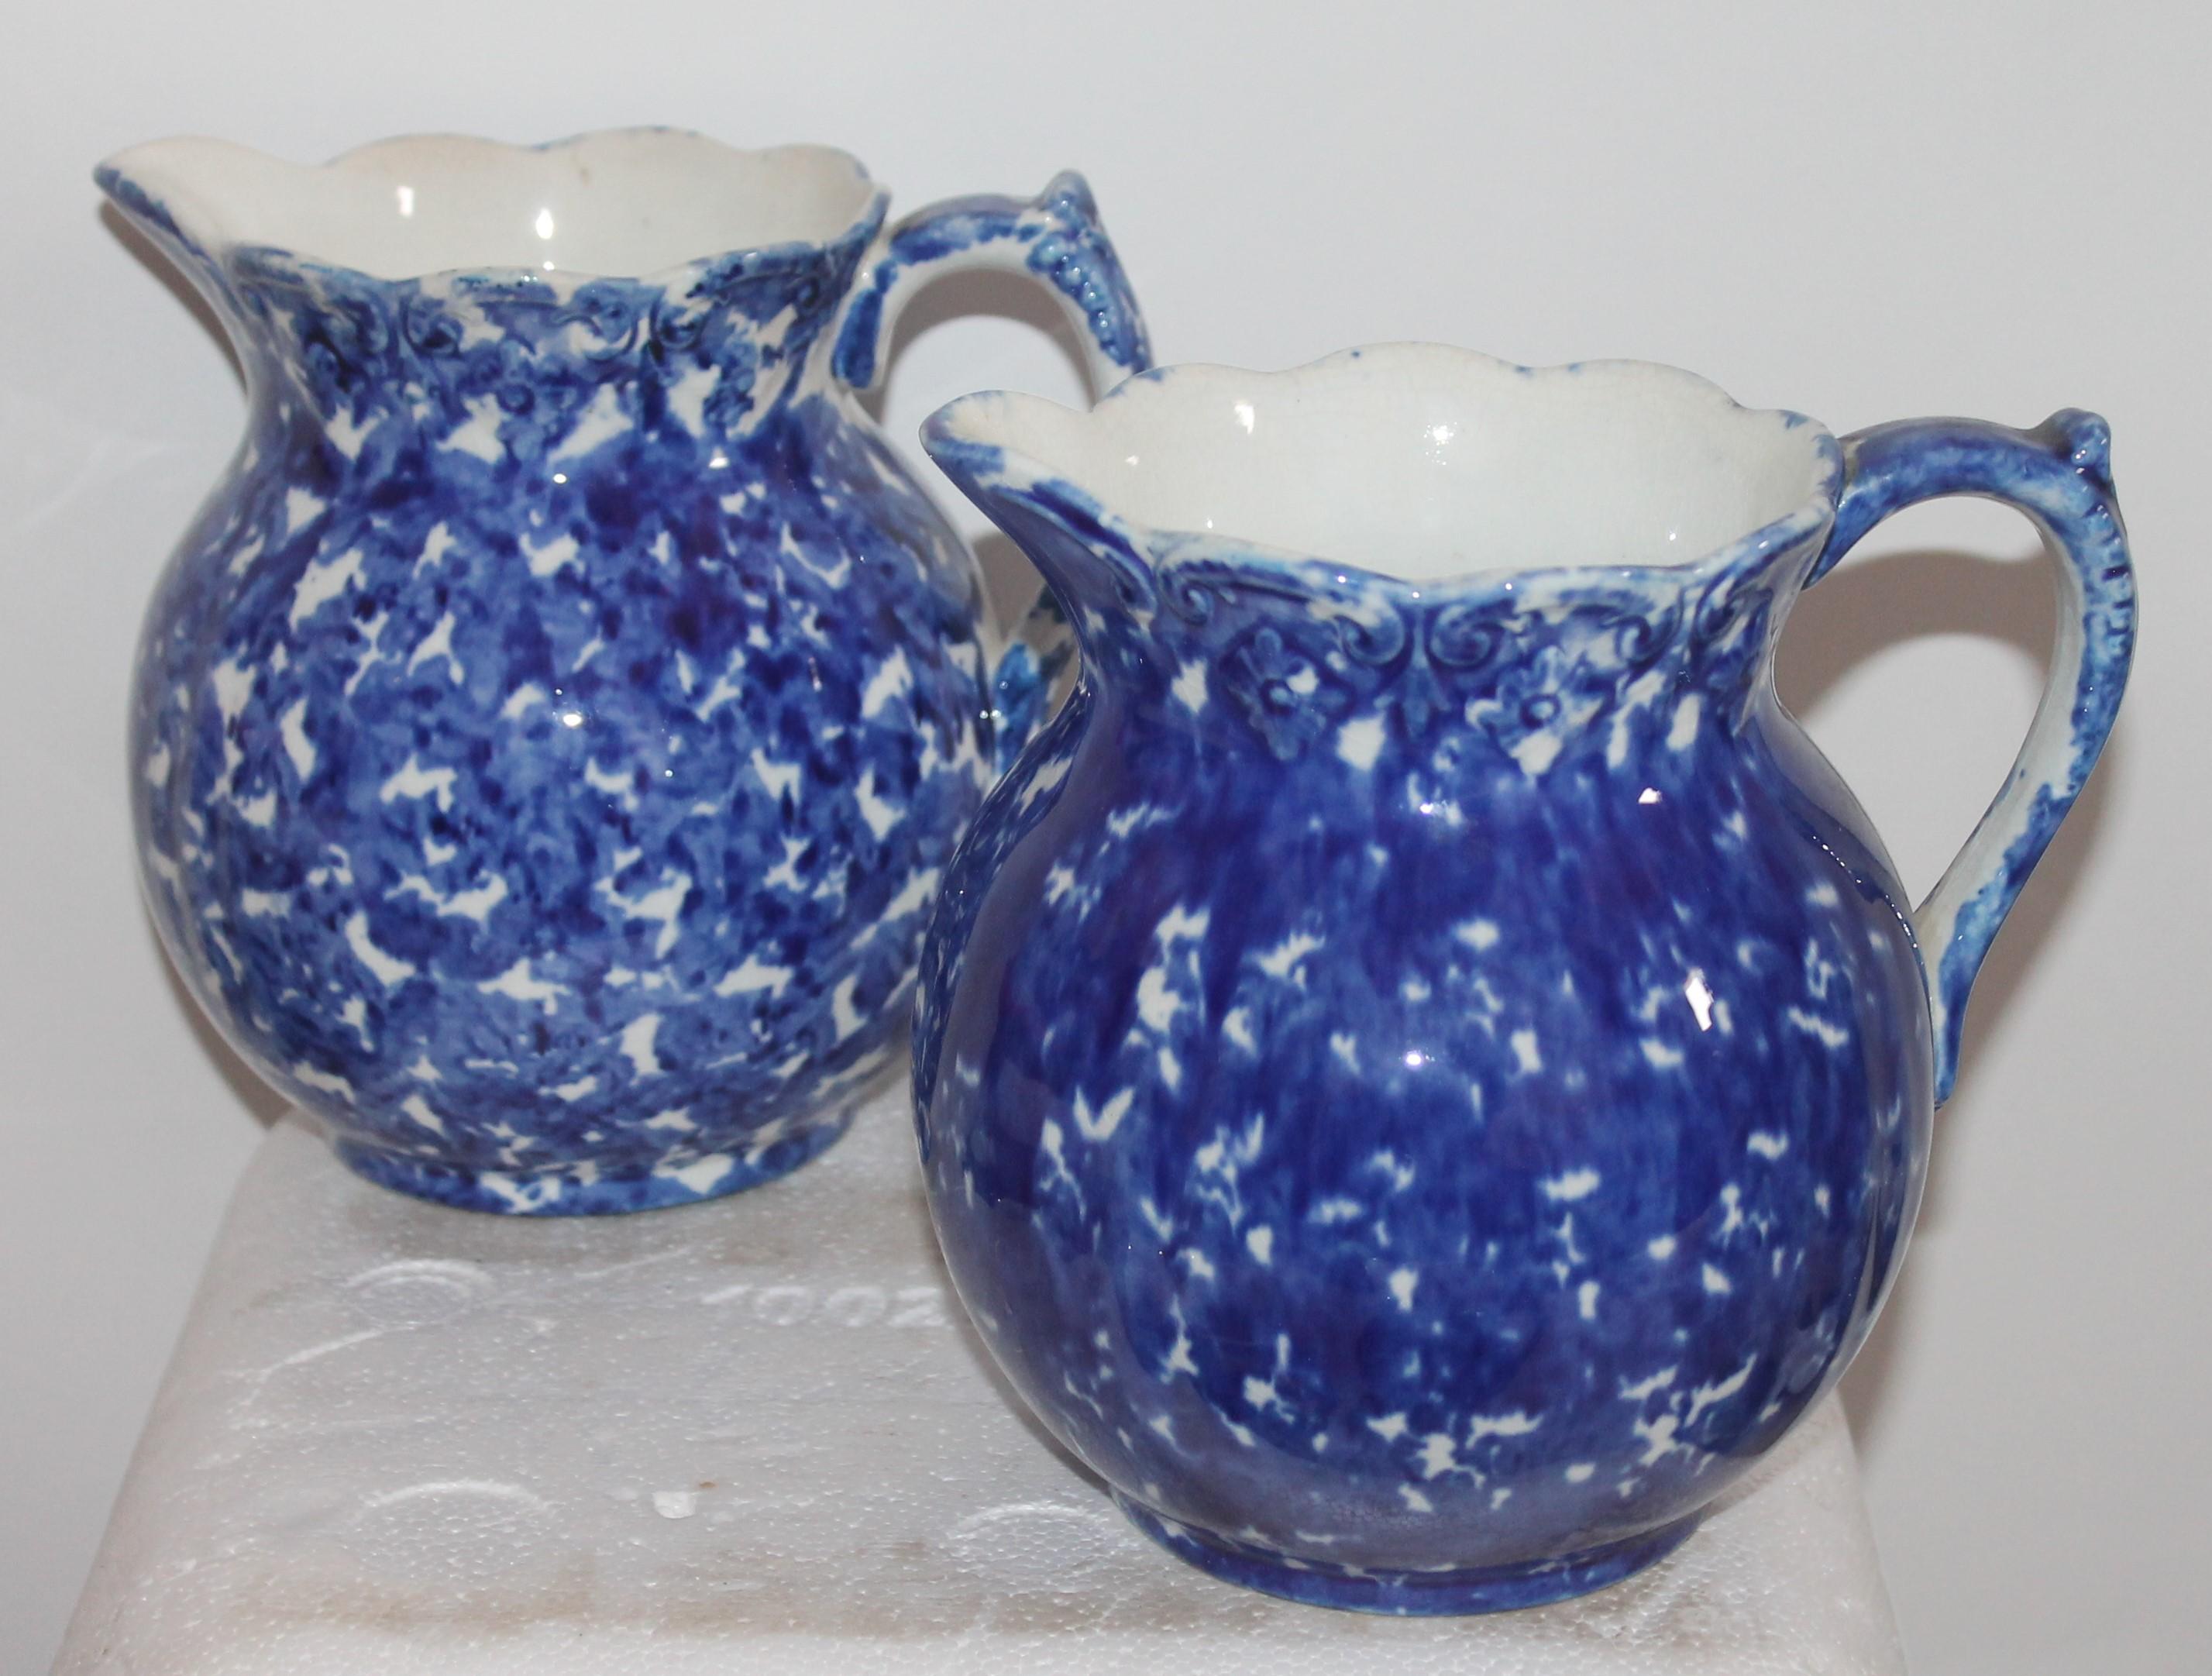 19th Century Bulbous Sponge Ware Pitcher Collection, 8 Pieces In Excellent Condition For Sale In Los Angeles, CA